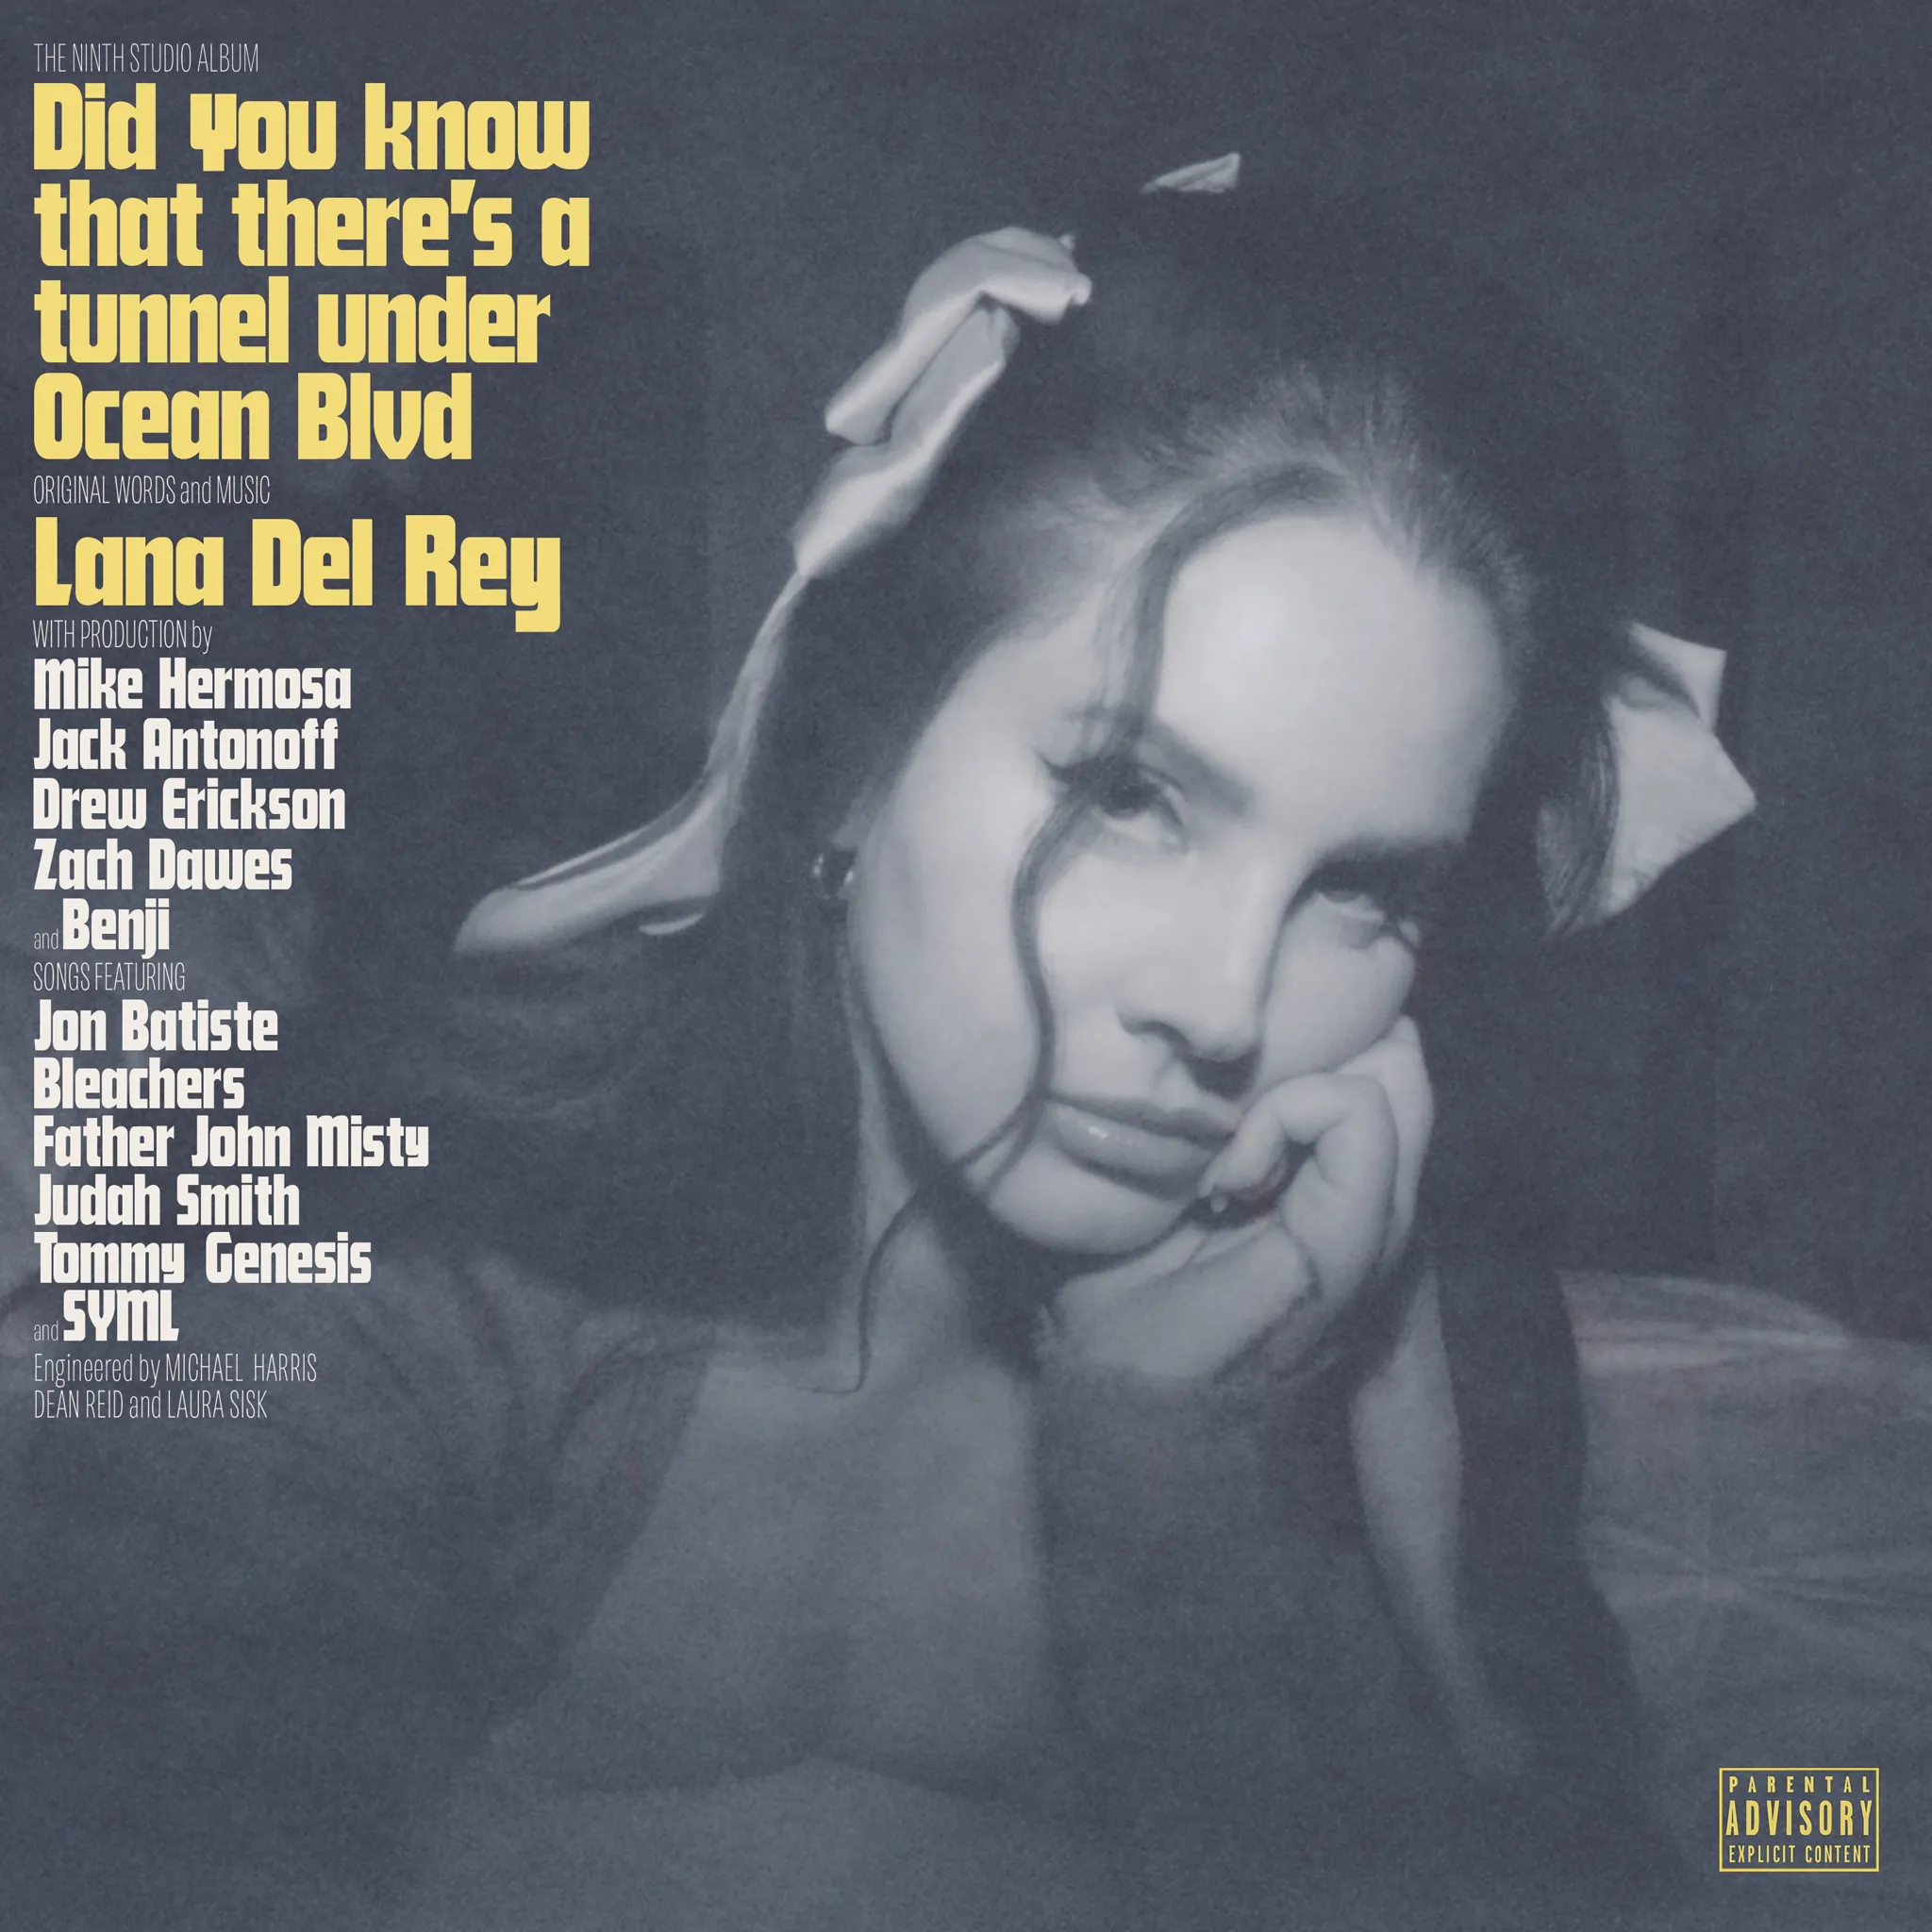 <strong>Lana Del Rey - Did you know that there's a tunnel under Ocean Blvd</strong> (Cd)